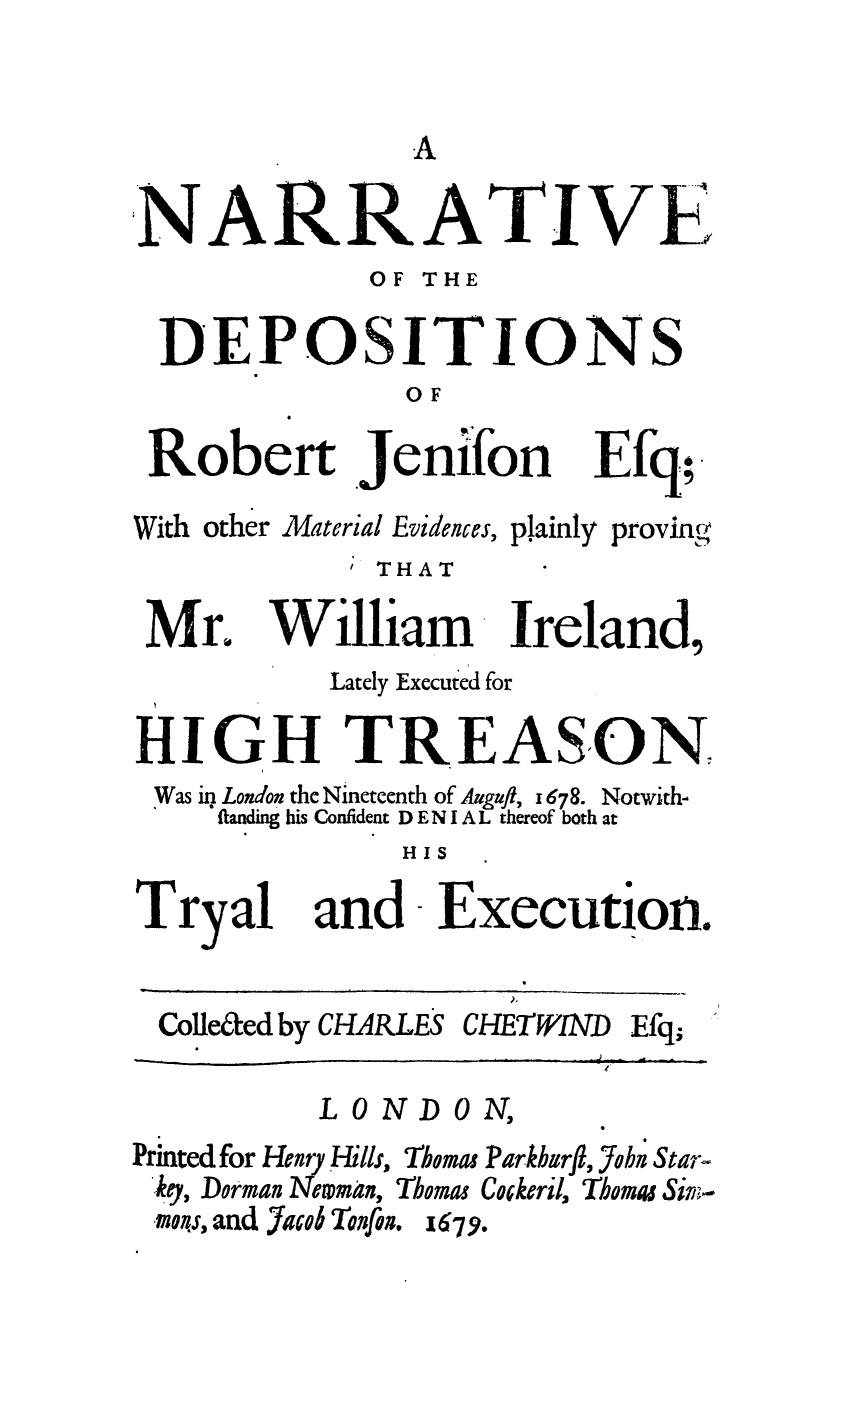 handle is hein.trials/nardemter0001 and id is 1 raw text is: NARRATIVE
OF THE
DEPOSITIONS
OF

Robert

.Jenifon

Efq;.

With other Material Evidences, plainly
THAT

Mr.

proving

Lately Executed for
HIGH TREASON
Was in London the Nineteenth of Auguft, 1678. Notwith-
ftanding his Confident D E N I A L thereof both at
HIS

Tryal

and Execution.

Colle&ed by CHARLES

CHETWIND

LONDON,
Printed for Henry Hills, Thomas Parkburfl, Yobn Star-
key, Dorman Neman, Thomas Cockeril, Thomas Sir.-
,mans, and Jaco Tonfon. x679.

William Ireland,

Efq;


